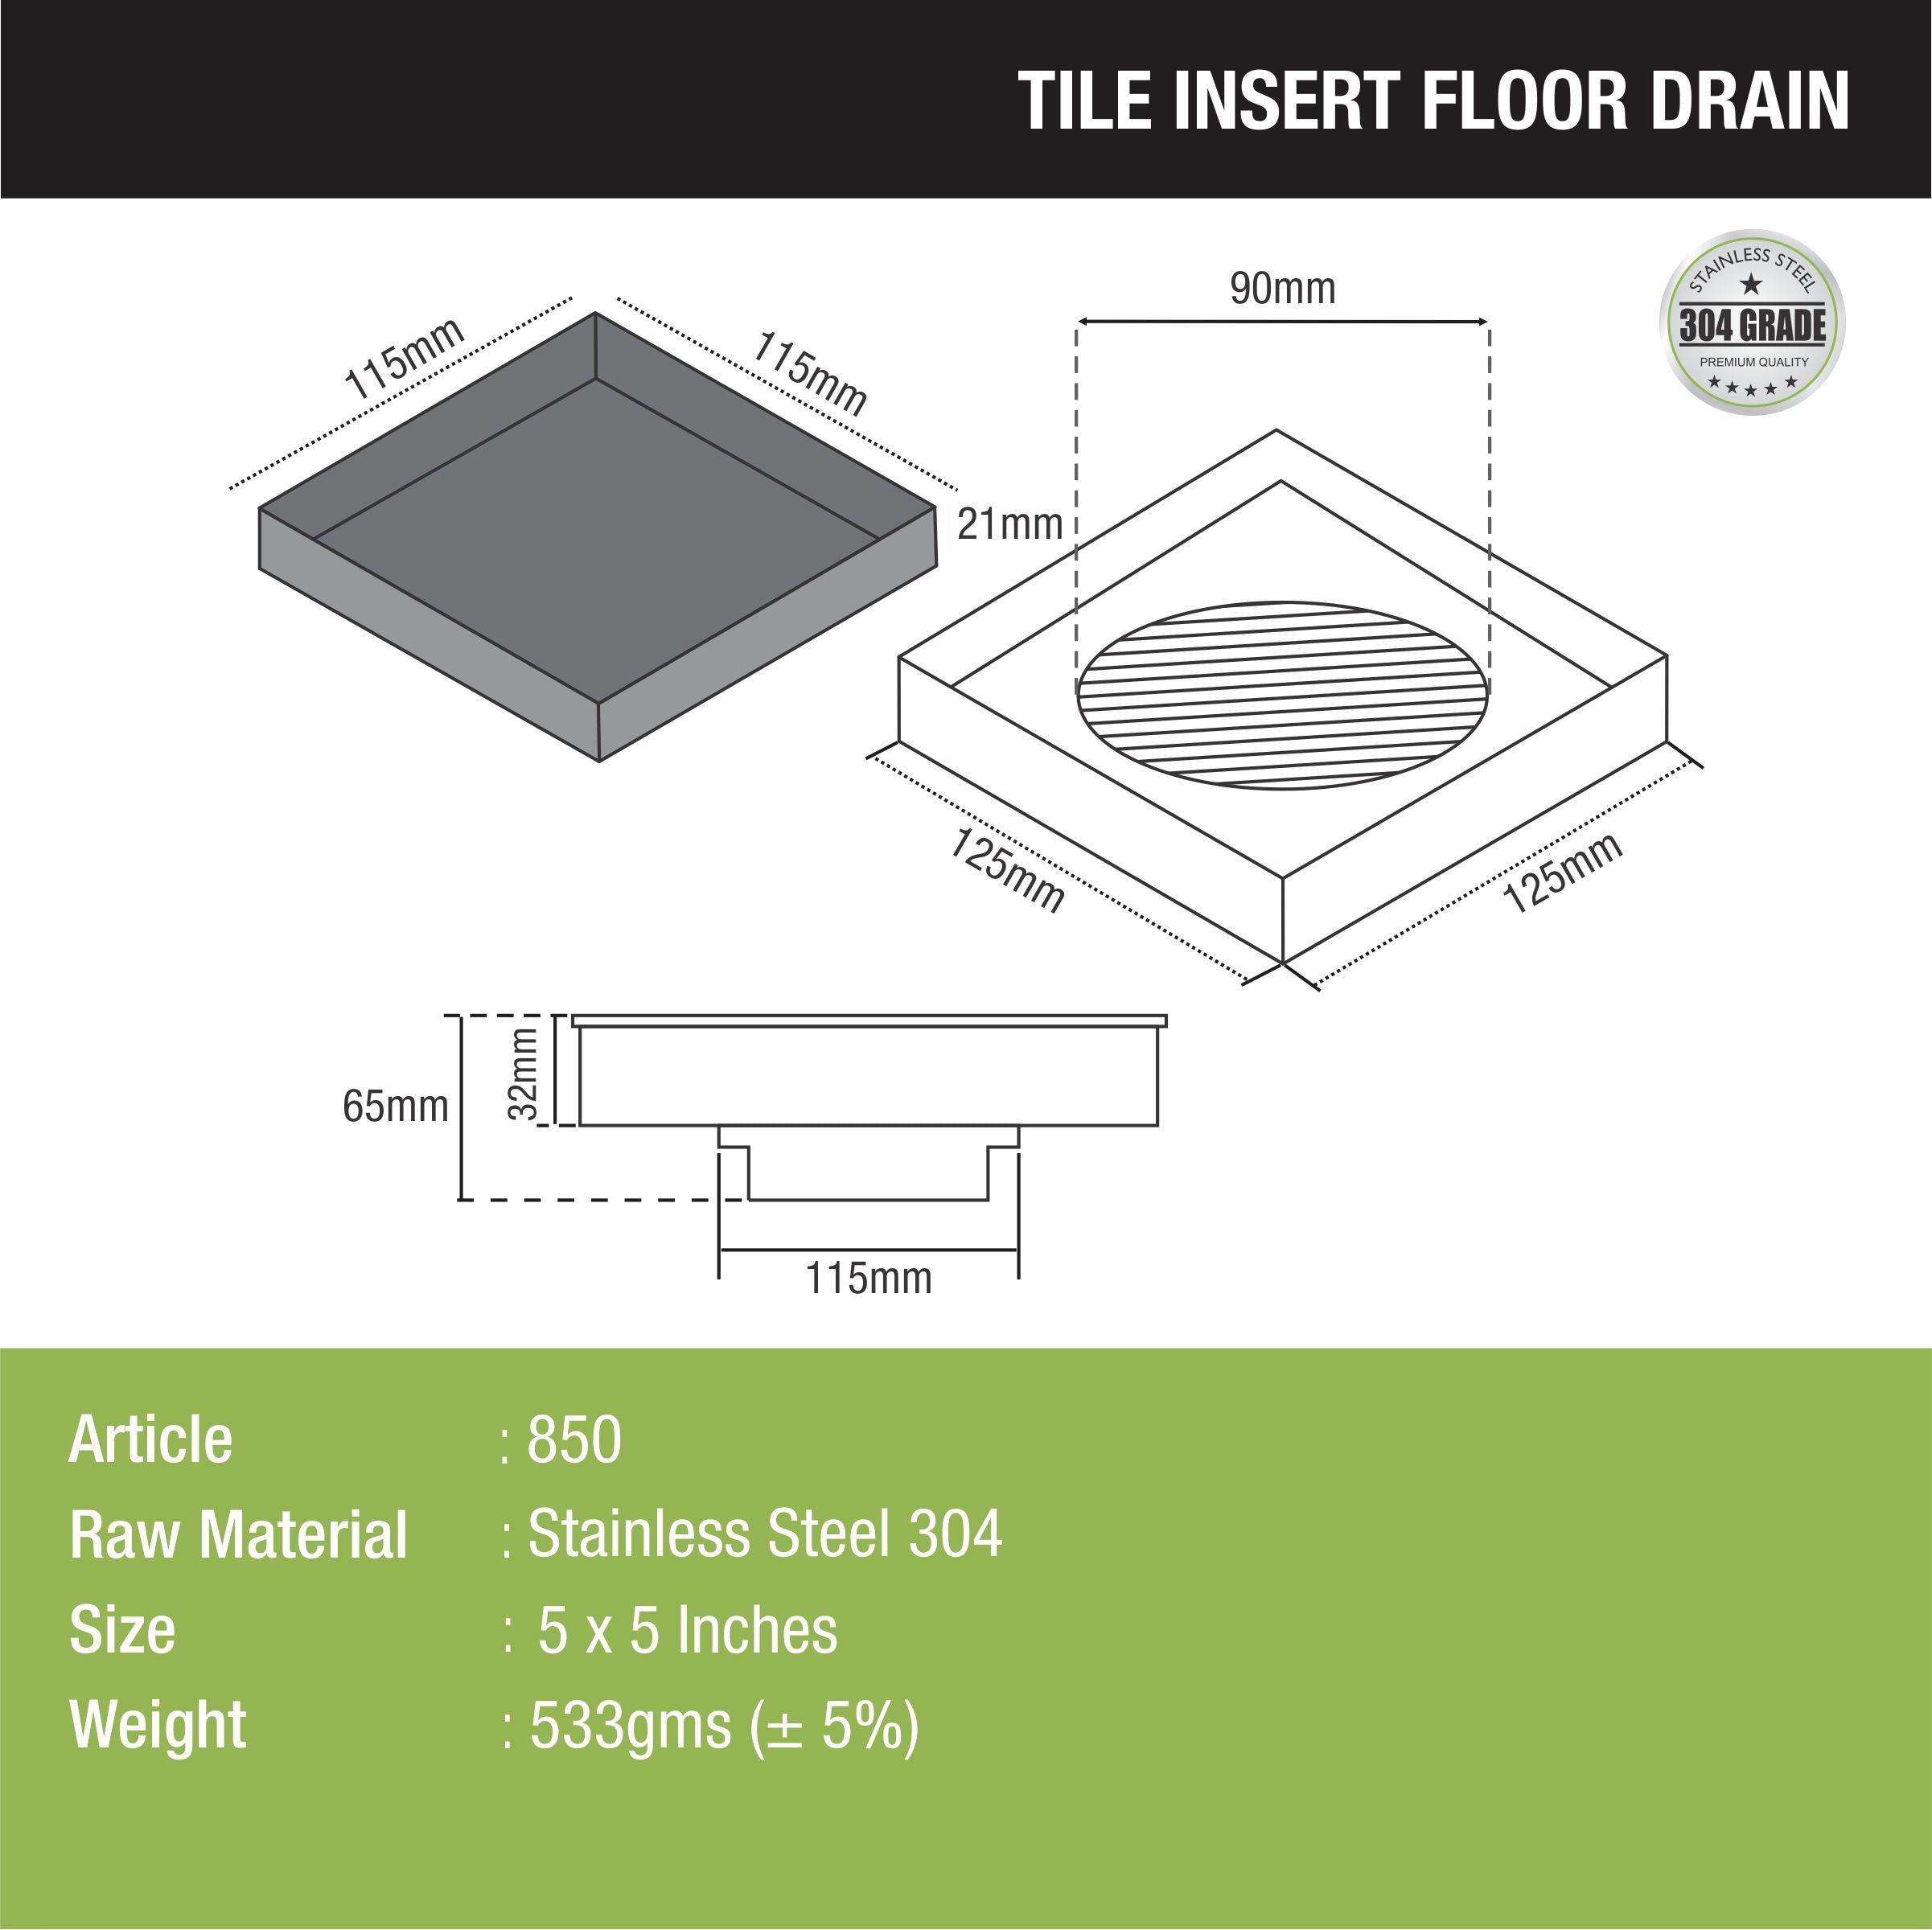 Tile Insert Floor Drain (12 x 12 Inches) sizes and dimensions